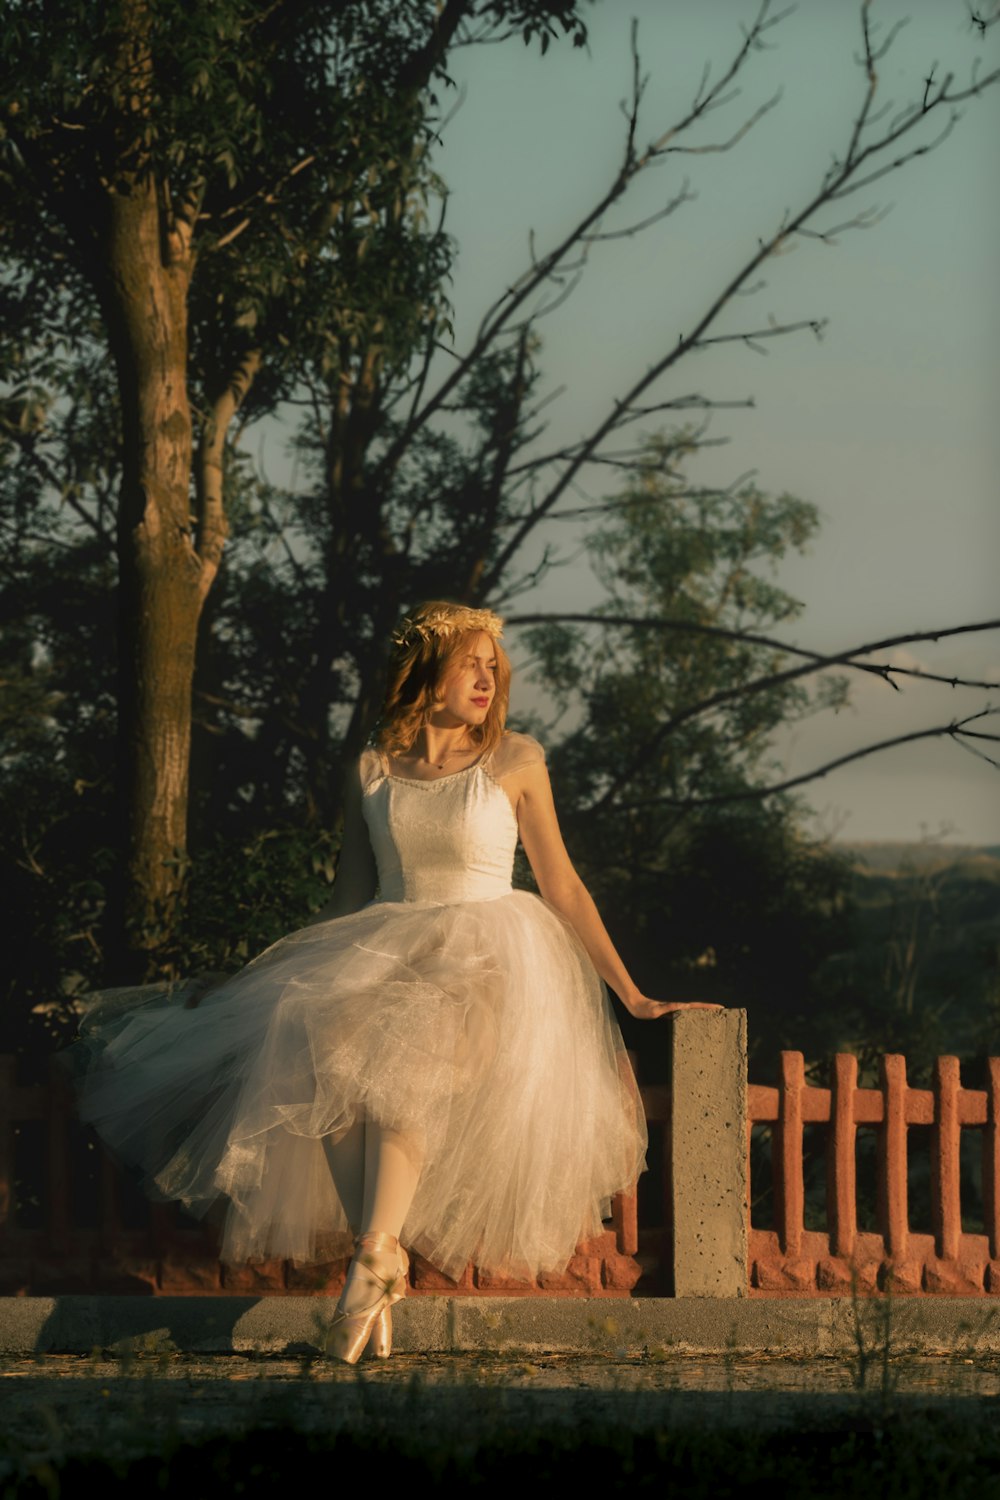 a woman in a white dress is sitting on a fence